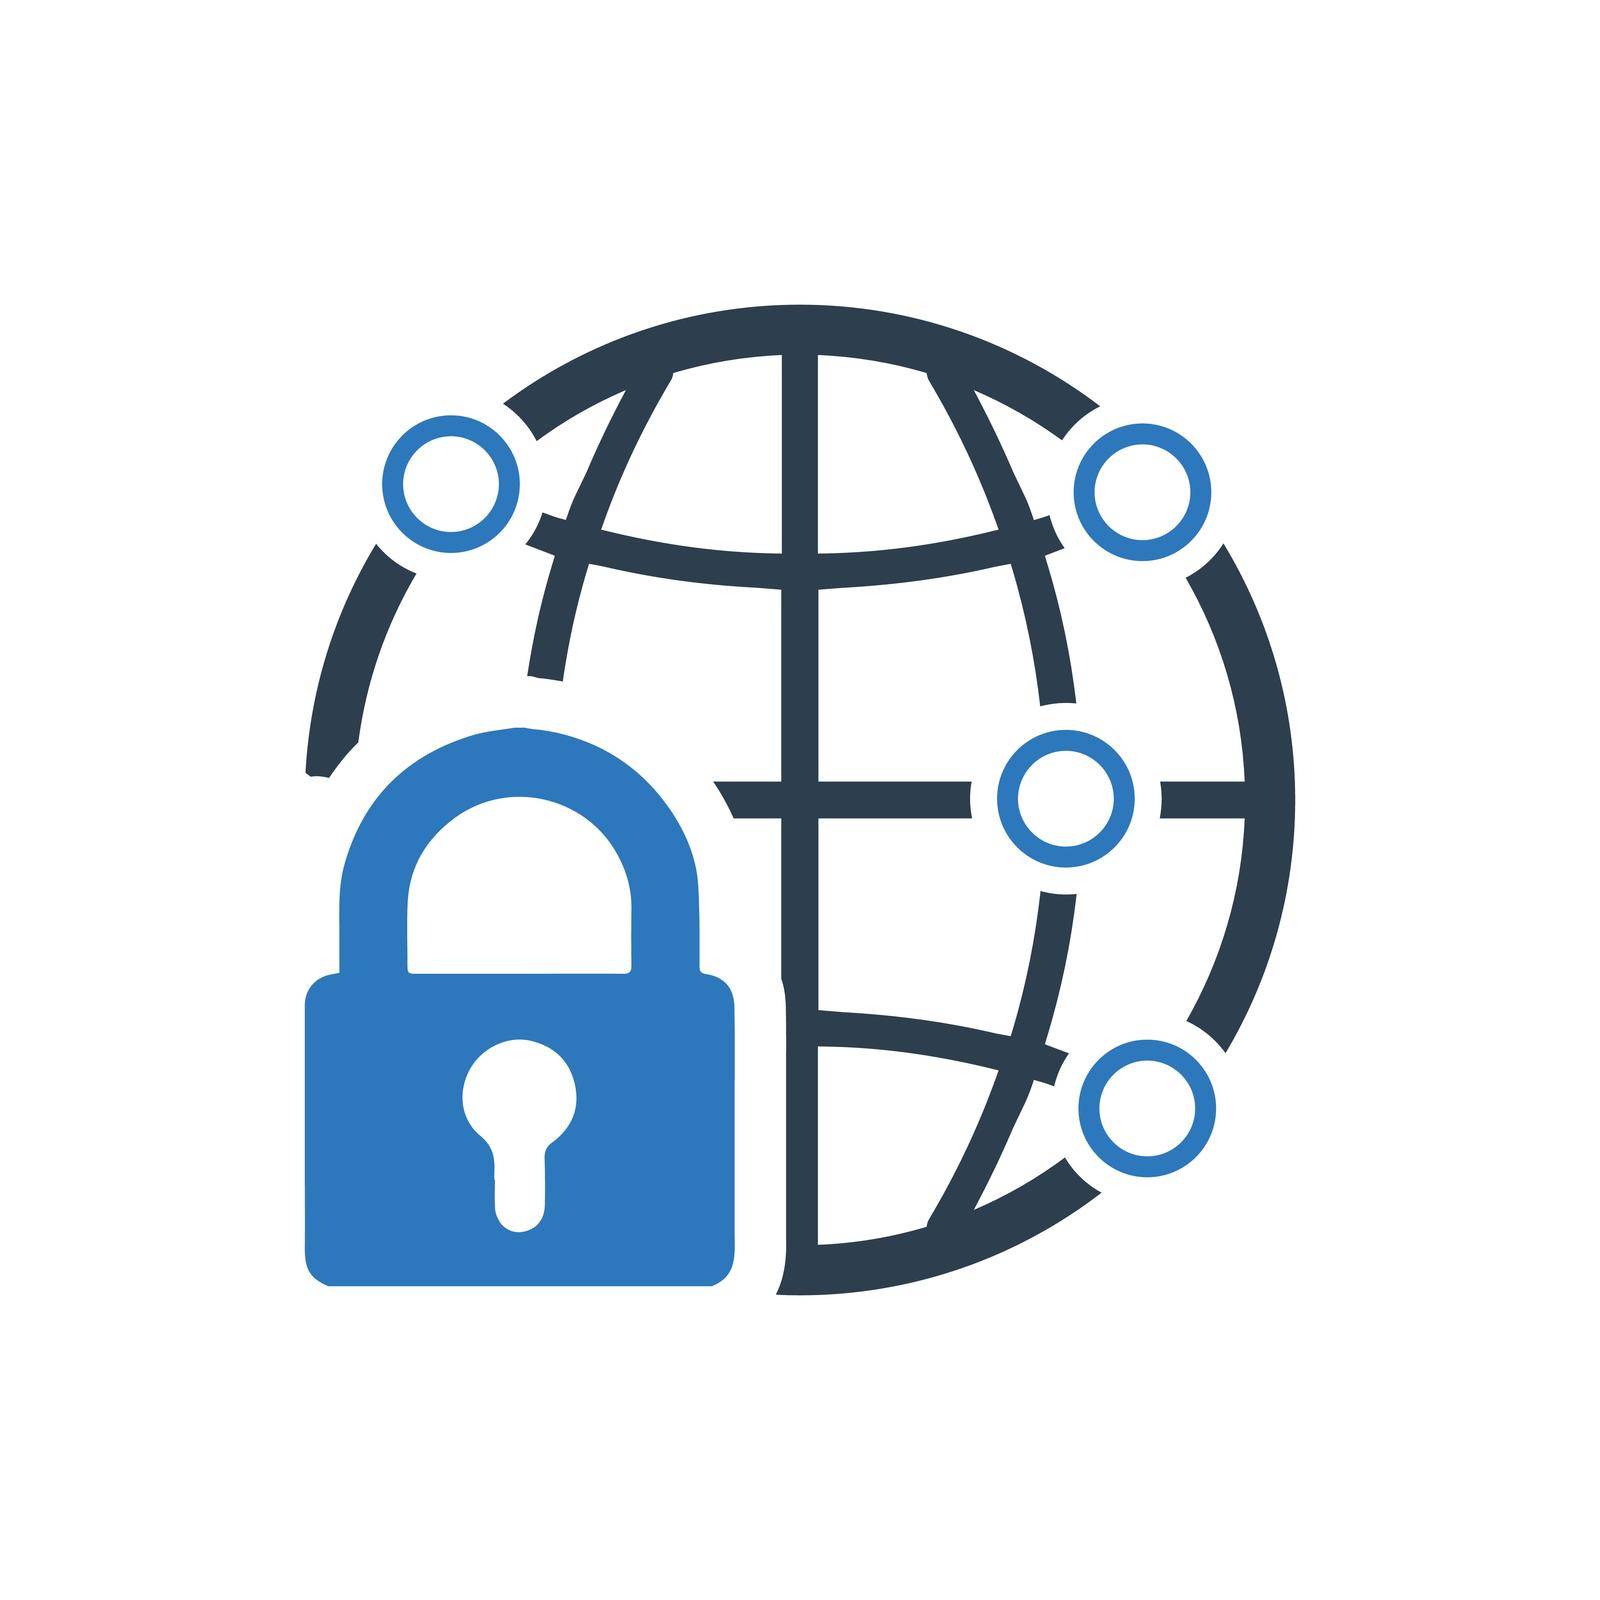 Network Protection icon. Vector EPS file.